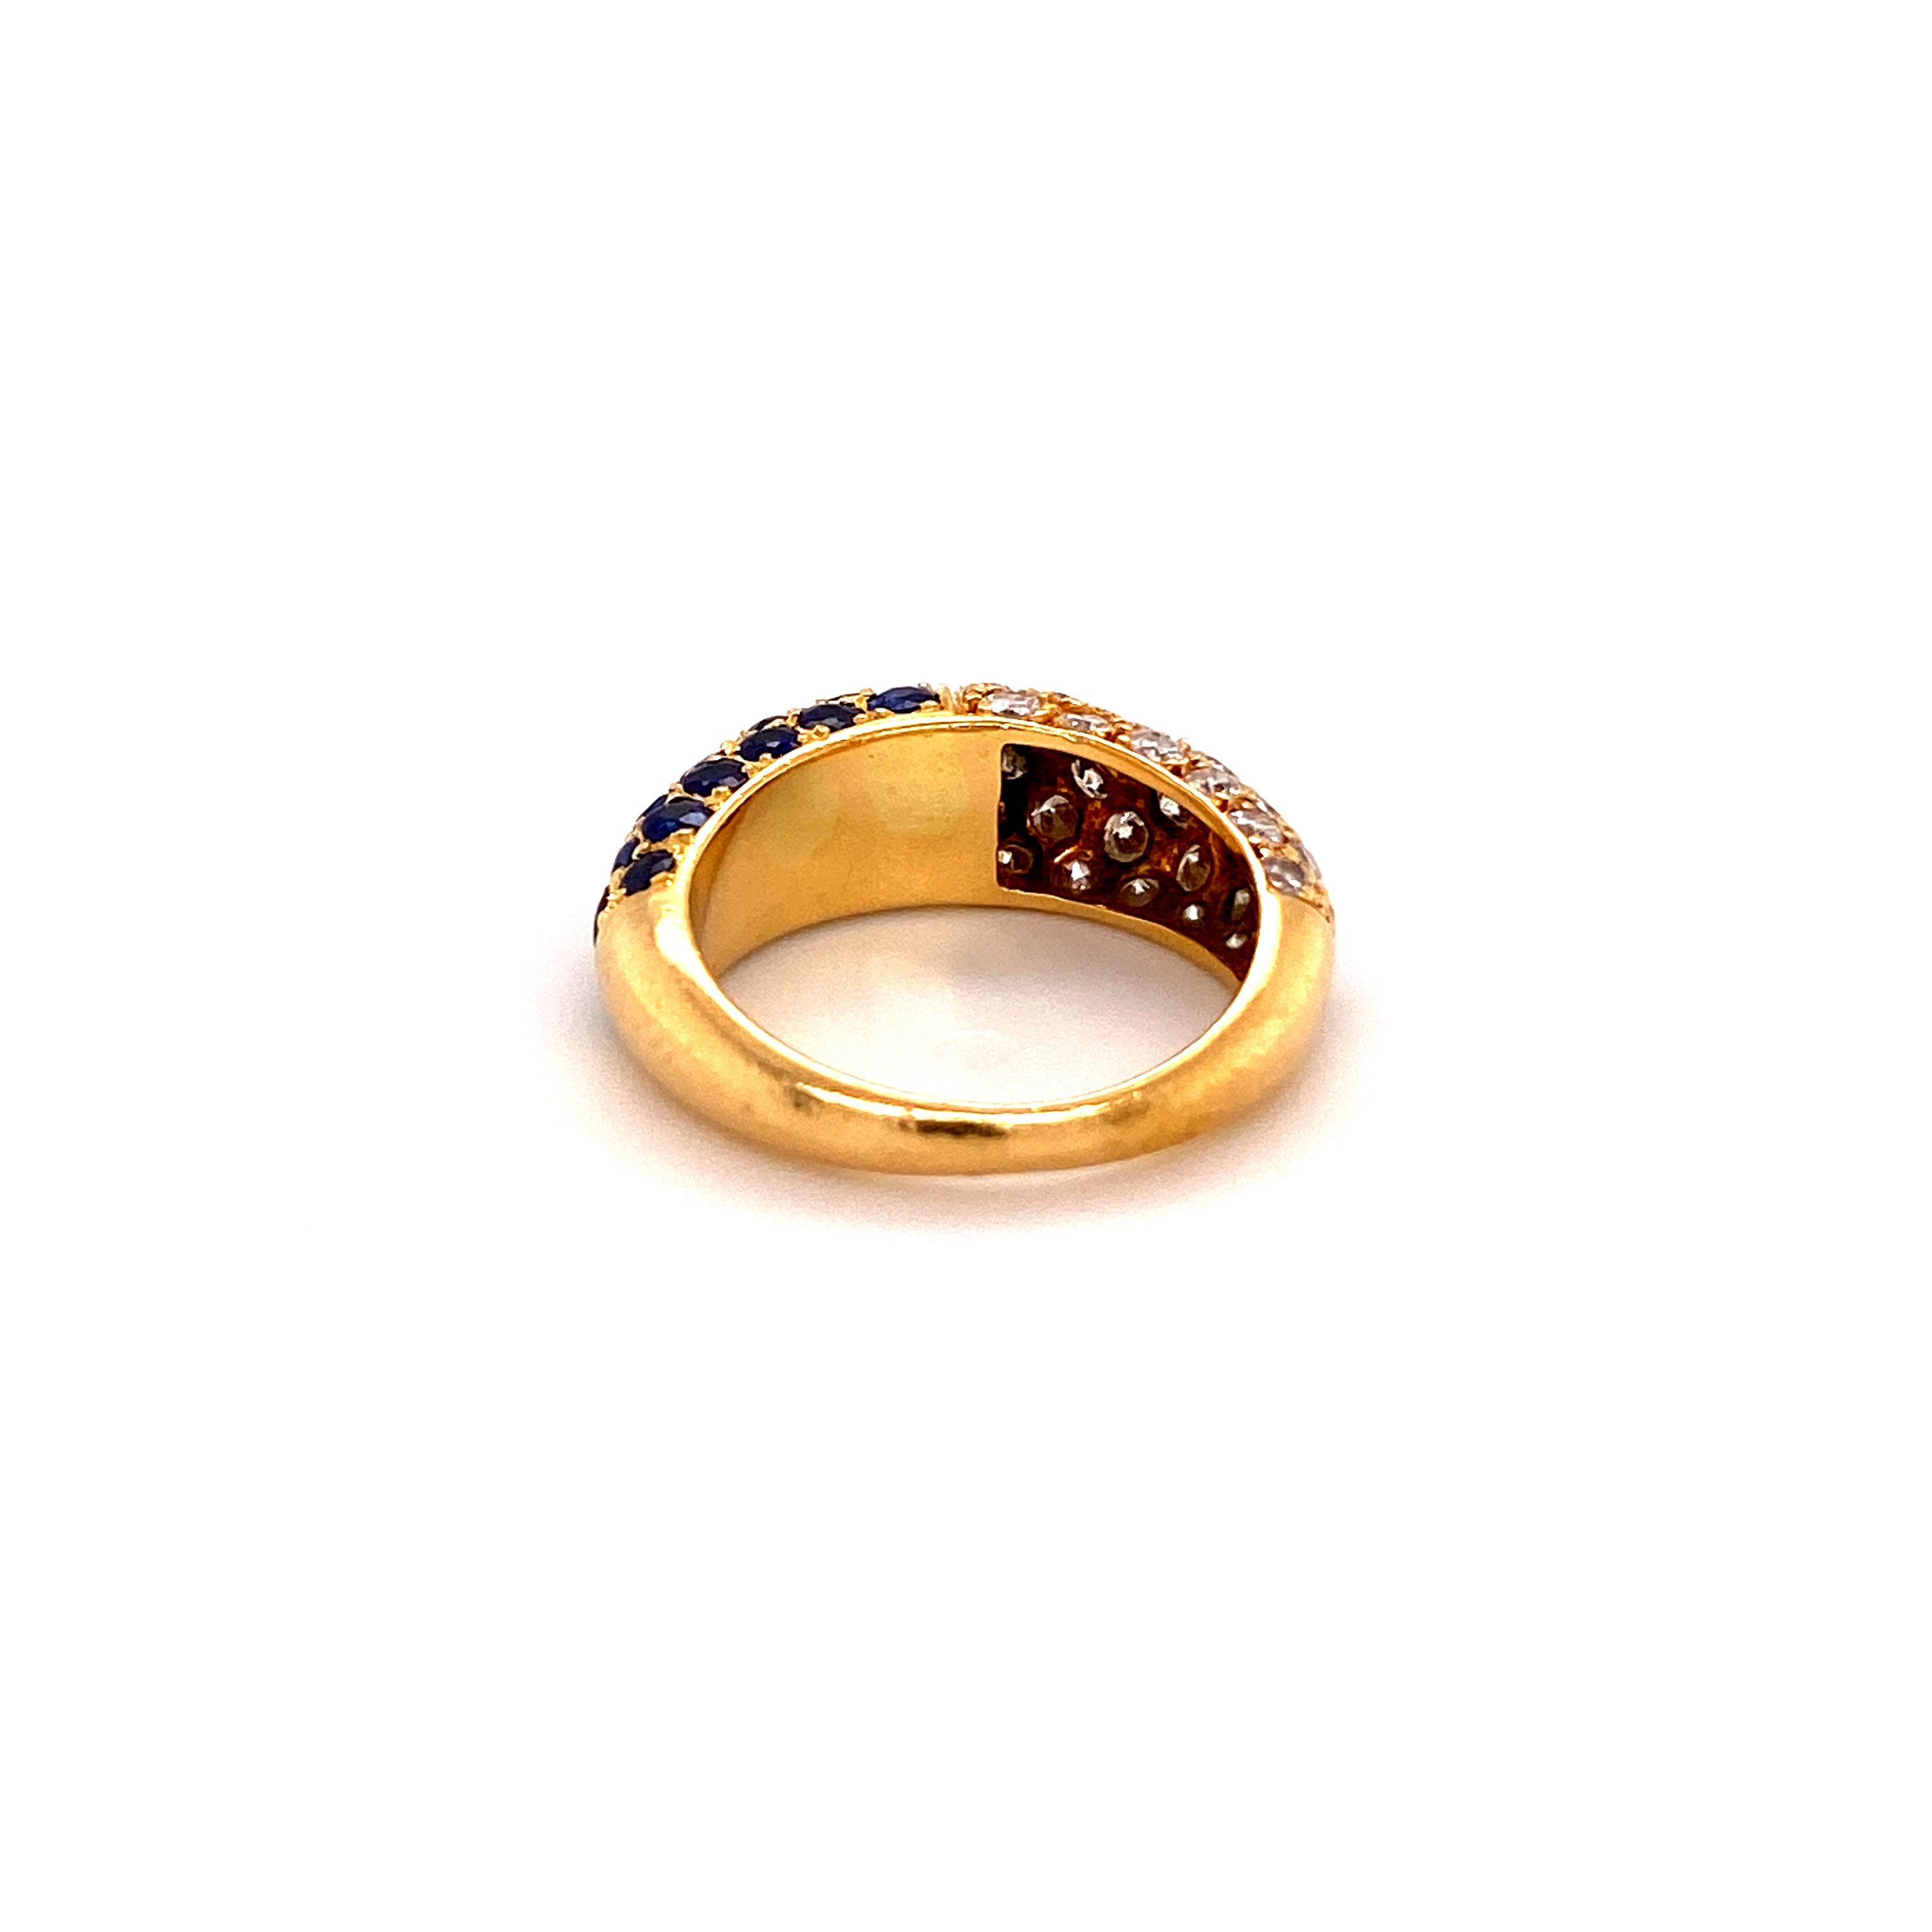 Cartier Sapphire and Diamond Ring in 18 Karat Yellow Gold 2